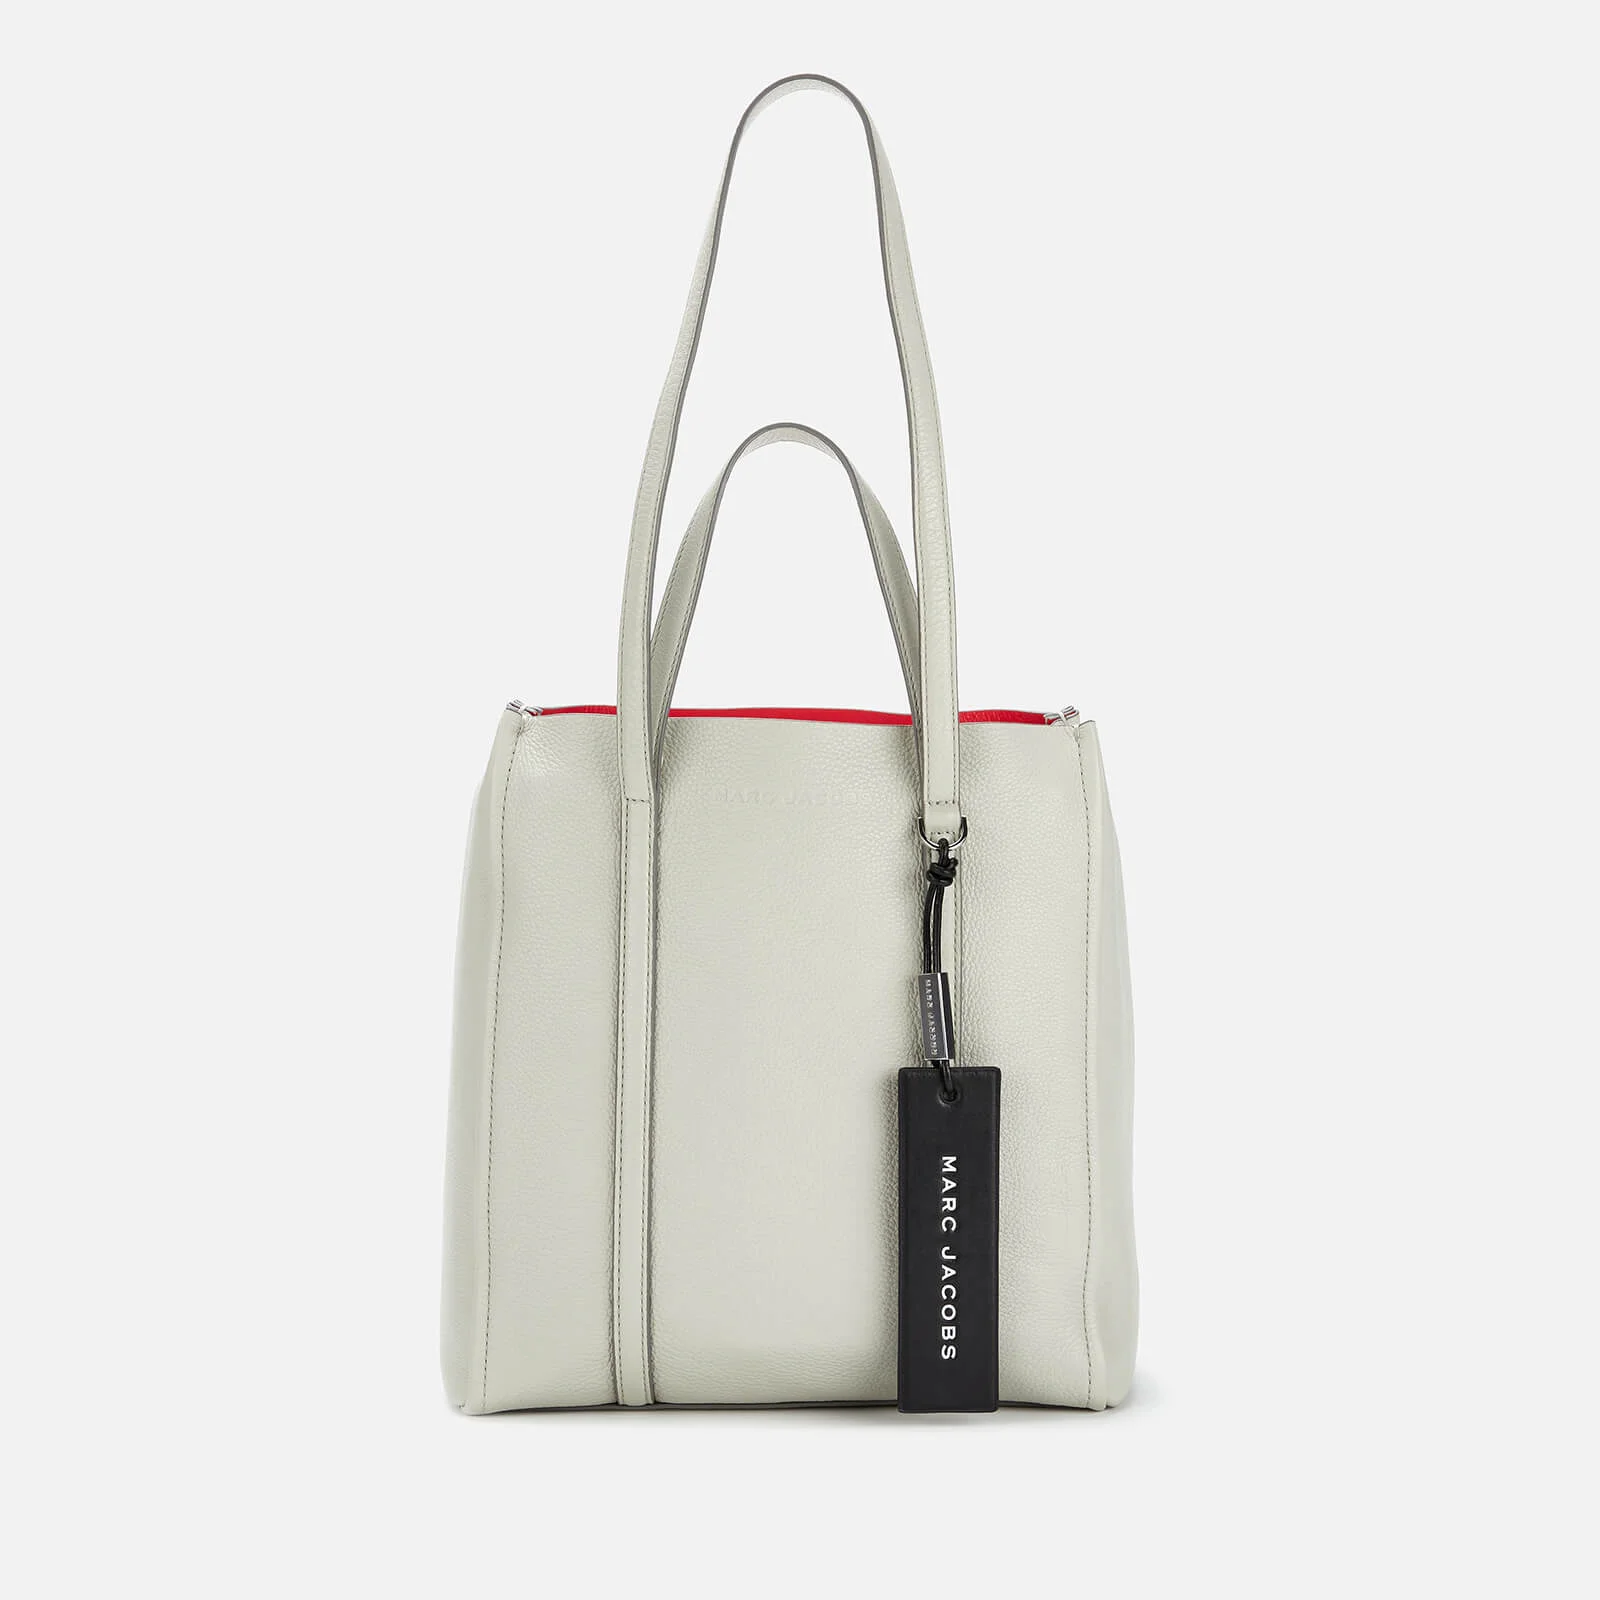 Marc Jacobs Women's 27 The Tag Tote Bag - Light Grey Image 1